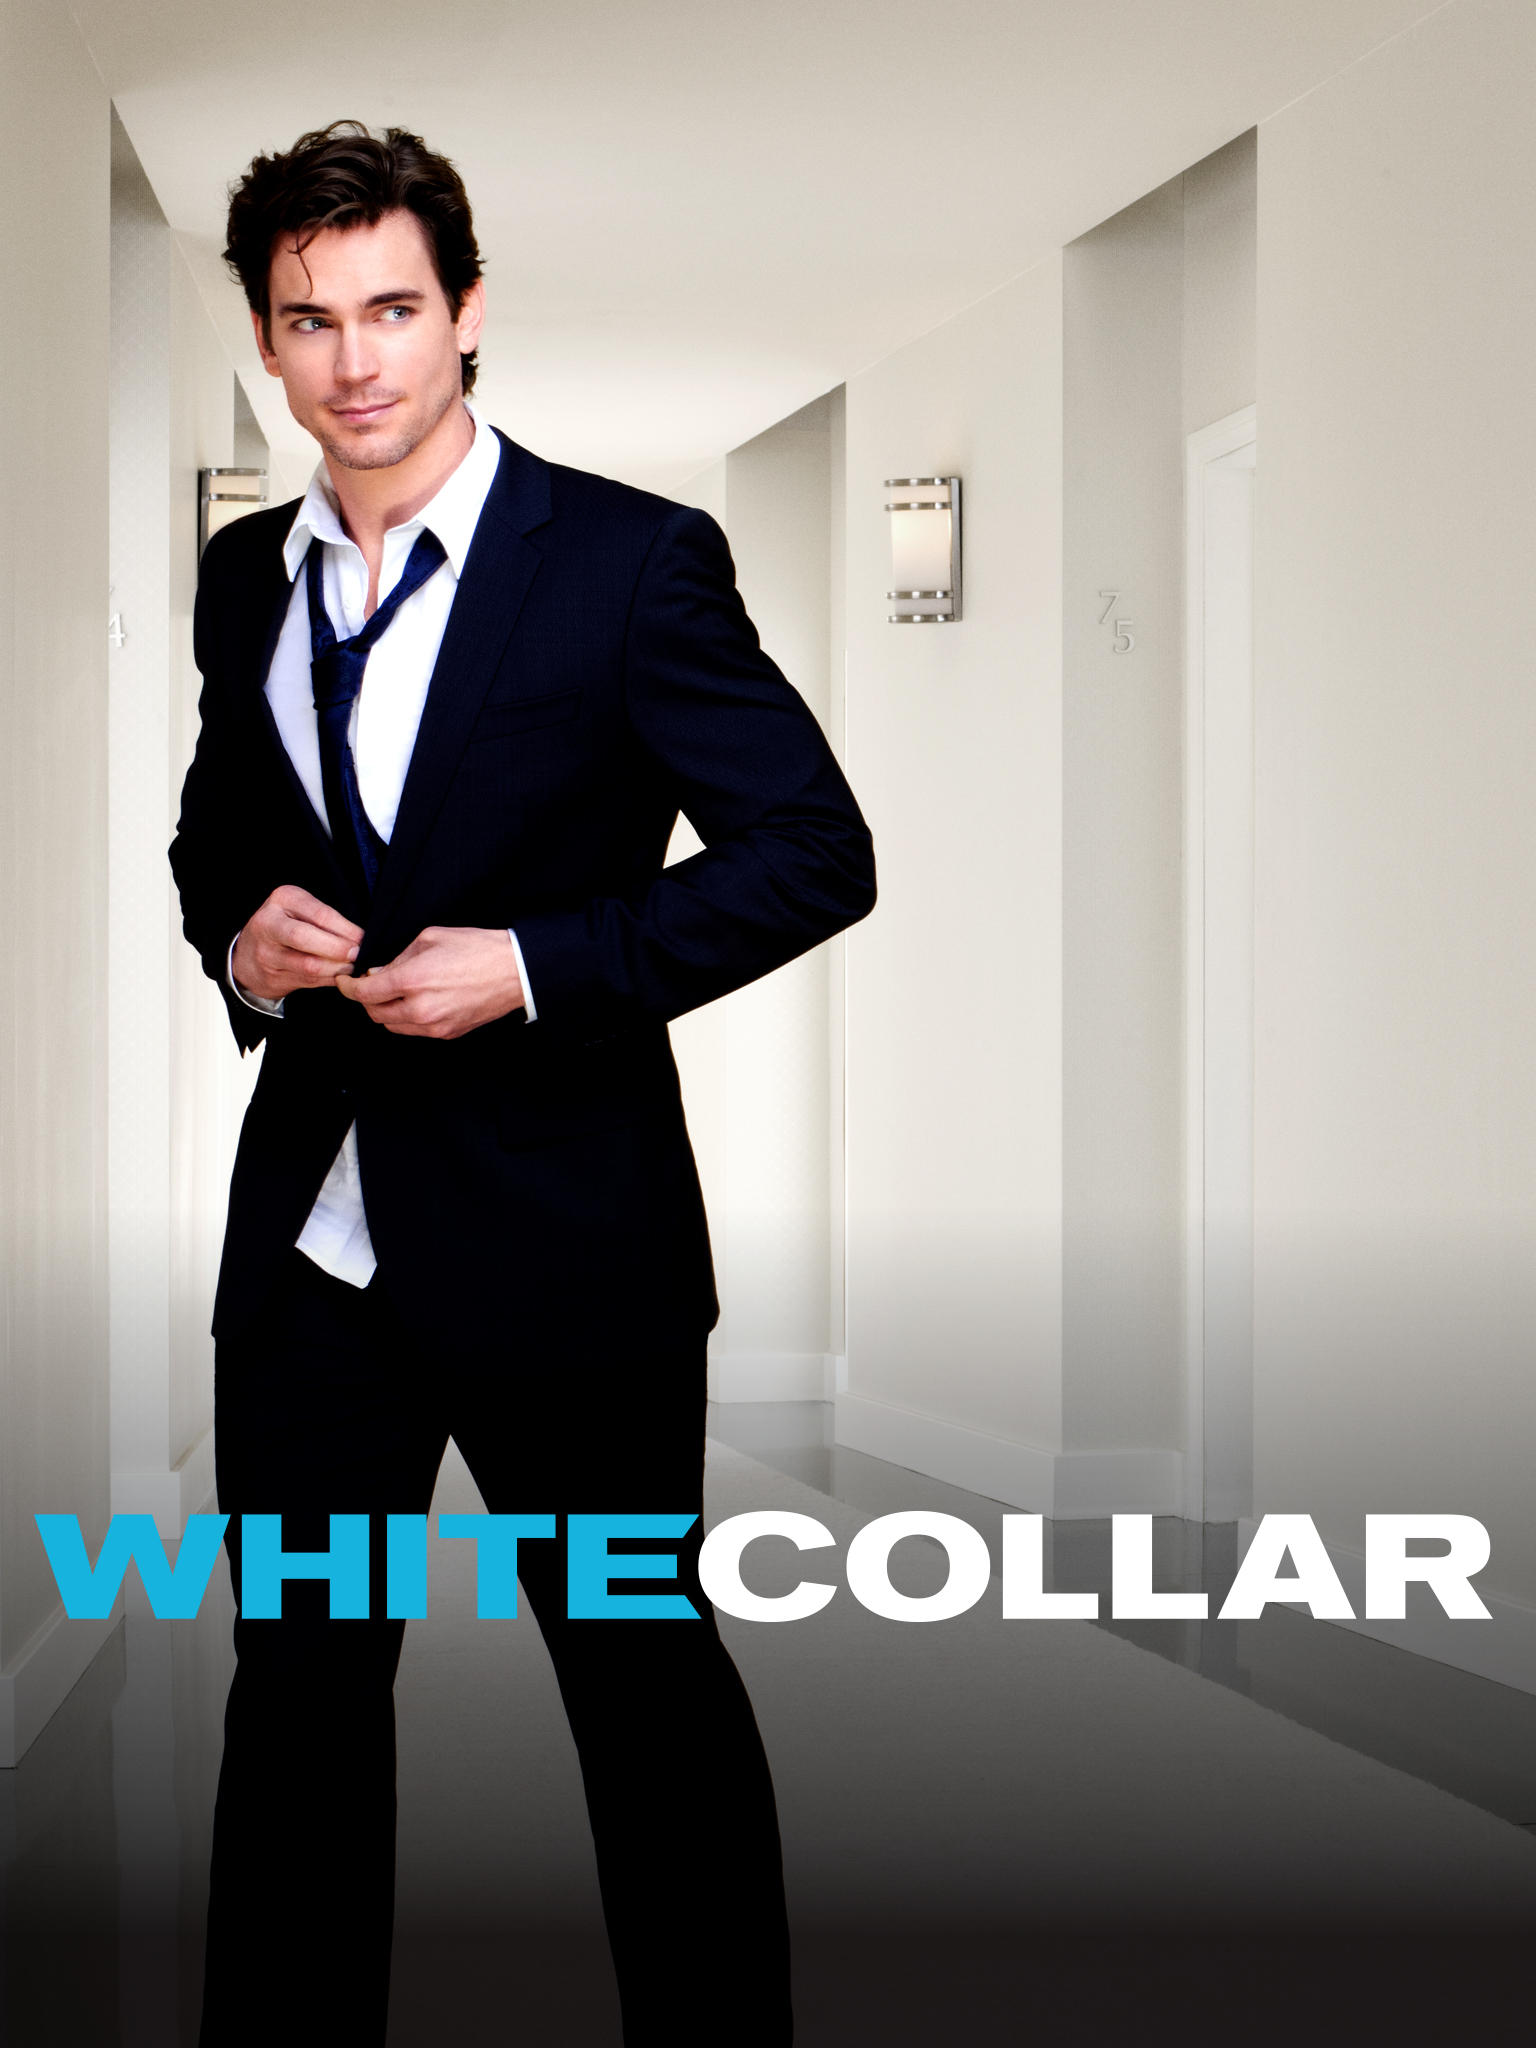 White Collar Cast: Where They Are Today